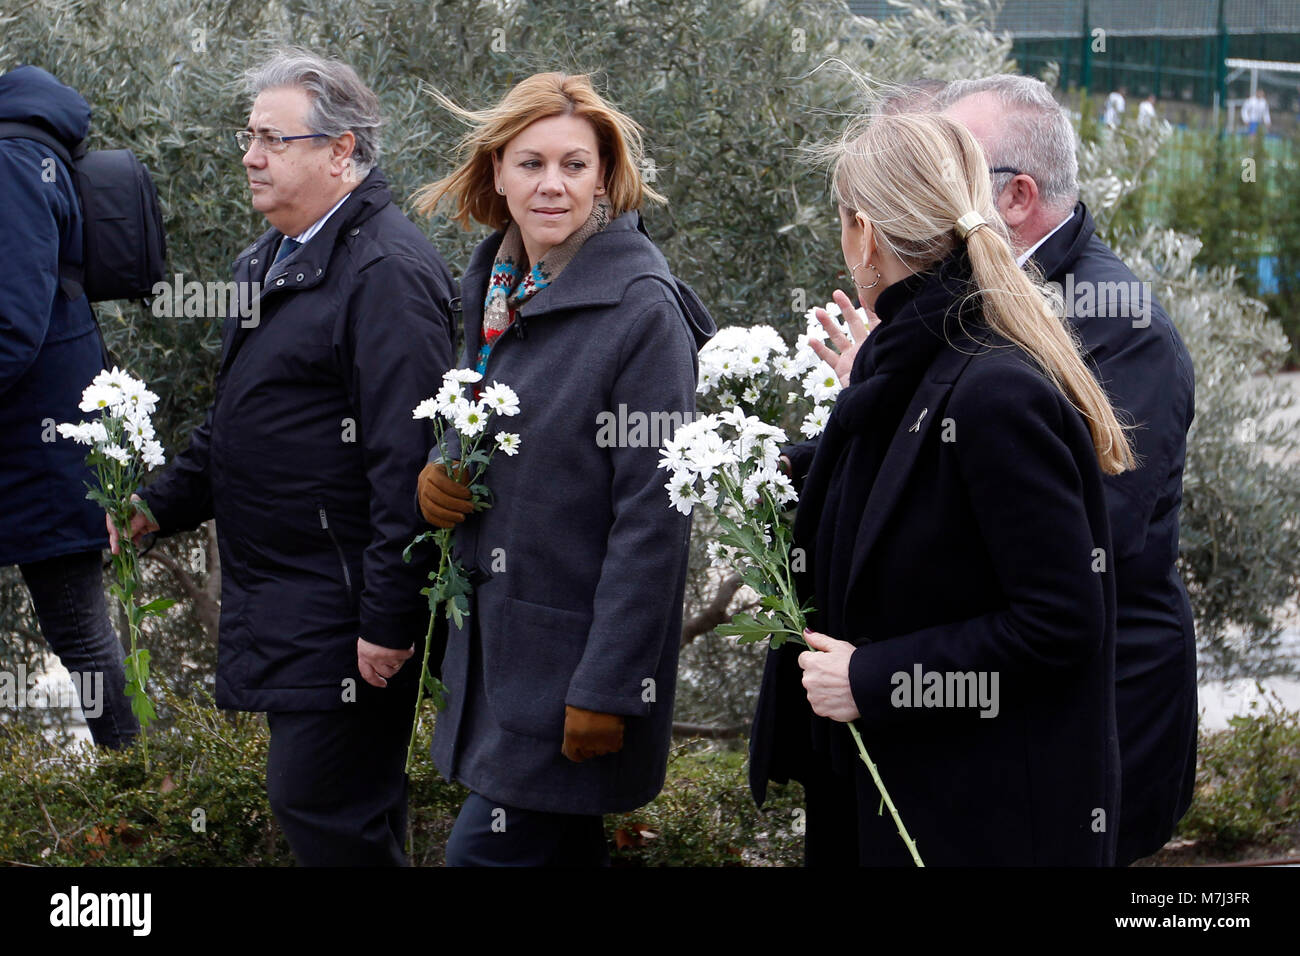 Madrid, Spain. 11th March, 2018.Politican Maria Dolores de Cospedal during a tribute in memory of the victims of the attack of 11-M 2004, at the forest of the Retiro Park on Sunday 11 March 2018. Credit: Gtres Información más Comuniación on line, S.L./Alamy Live News Stock Photo